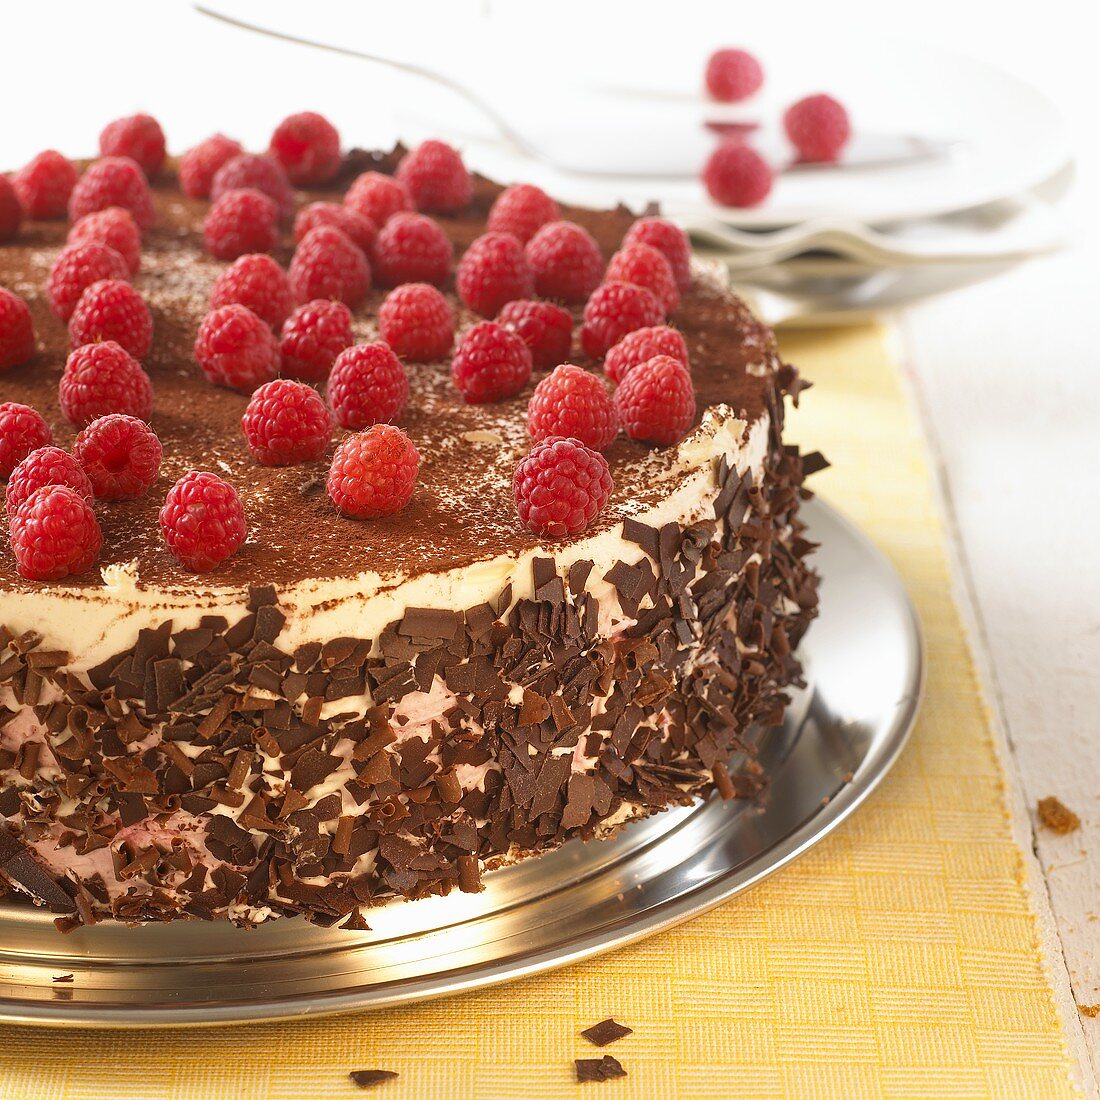 Raspberry cake with grated chocolate